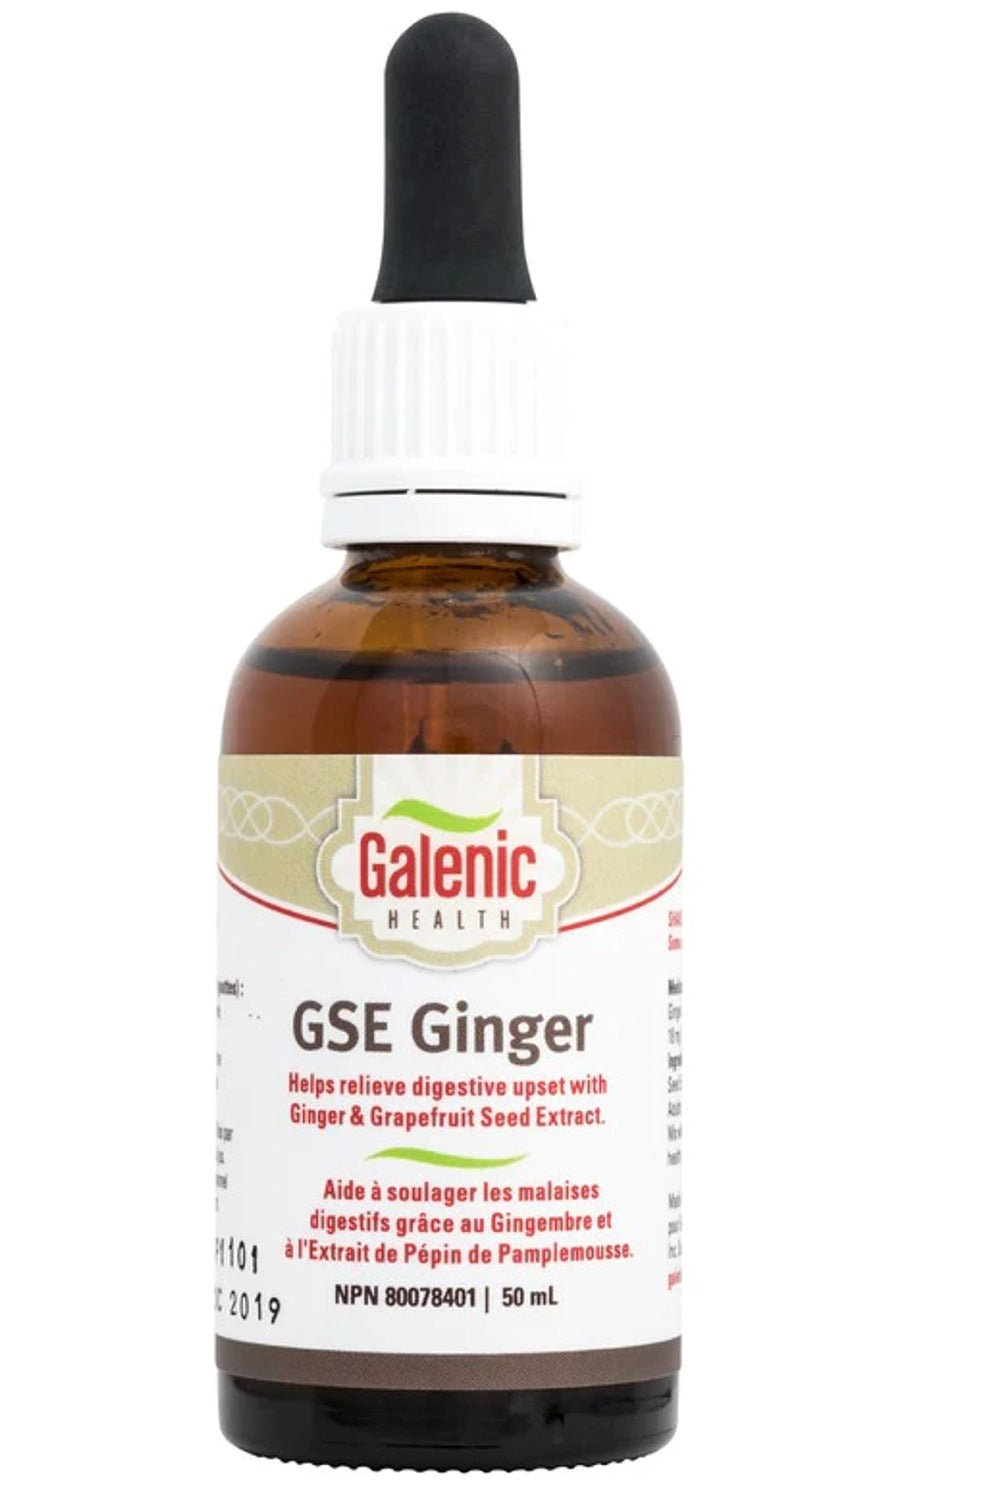 Galenic Health GSE Ginger Drops (50 ml)